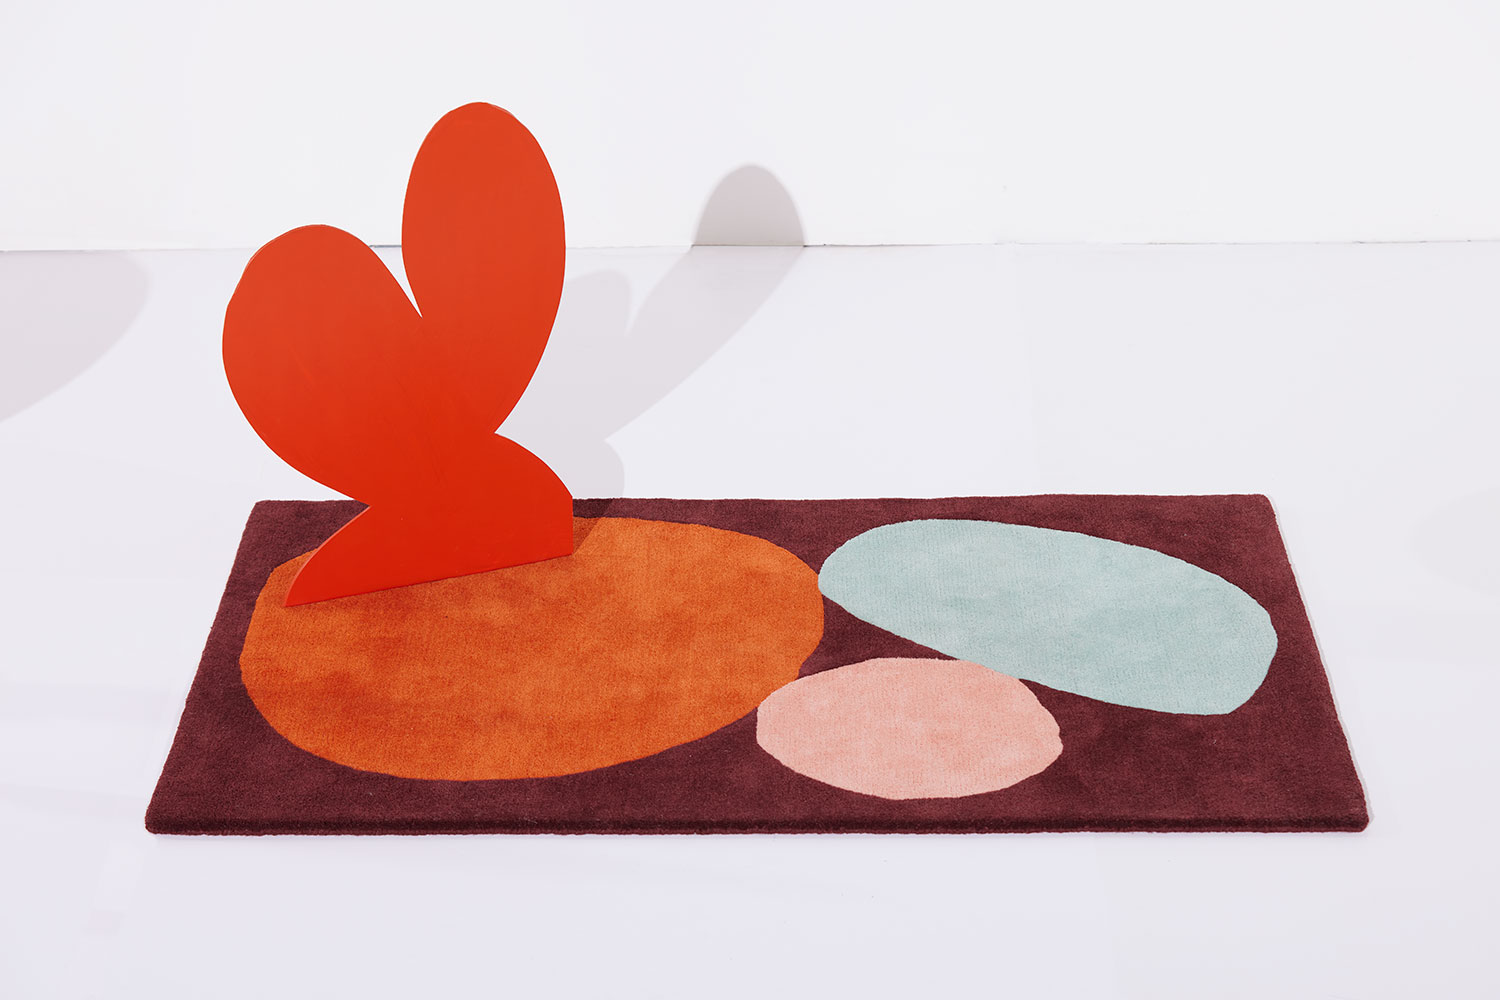 A cardboard heart cutout sits on a 3 foot by 5 foot modern rug called Three Stones Rust